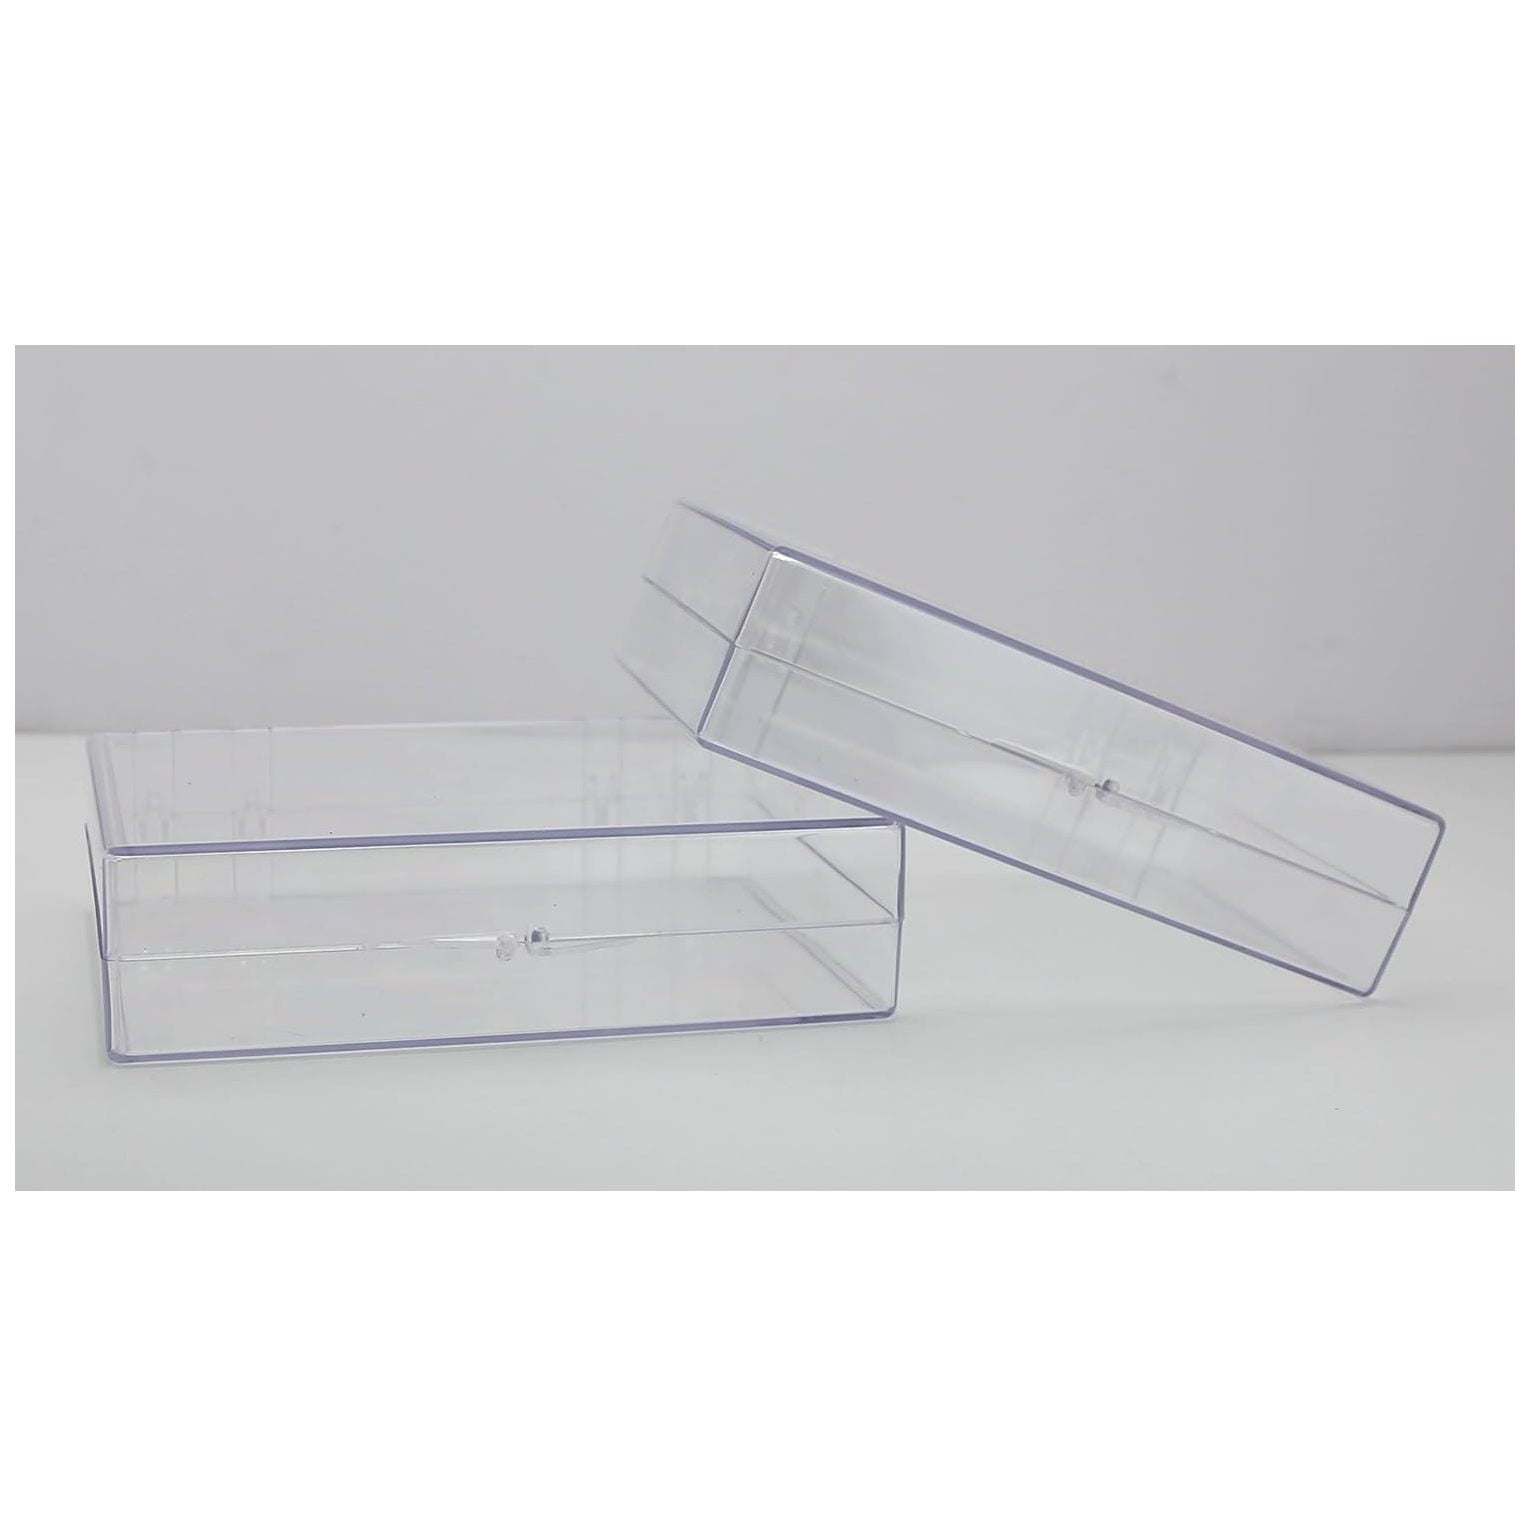 Plastic Boxes - 4 5/8 x 3 1/2 x 1 1/4, Clear - ULINE - Carton of 84 - S-6278